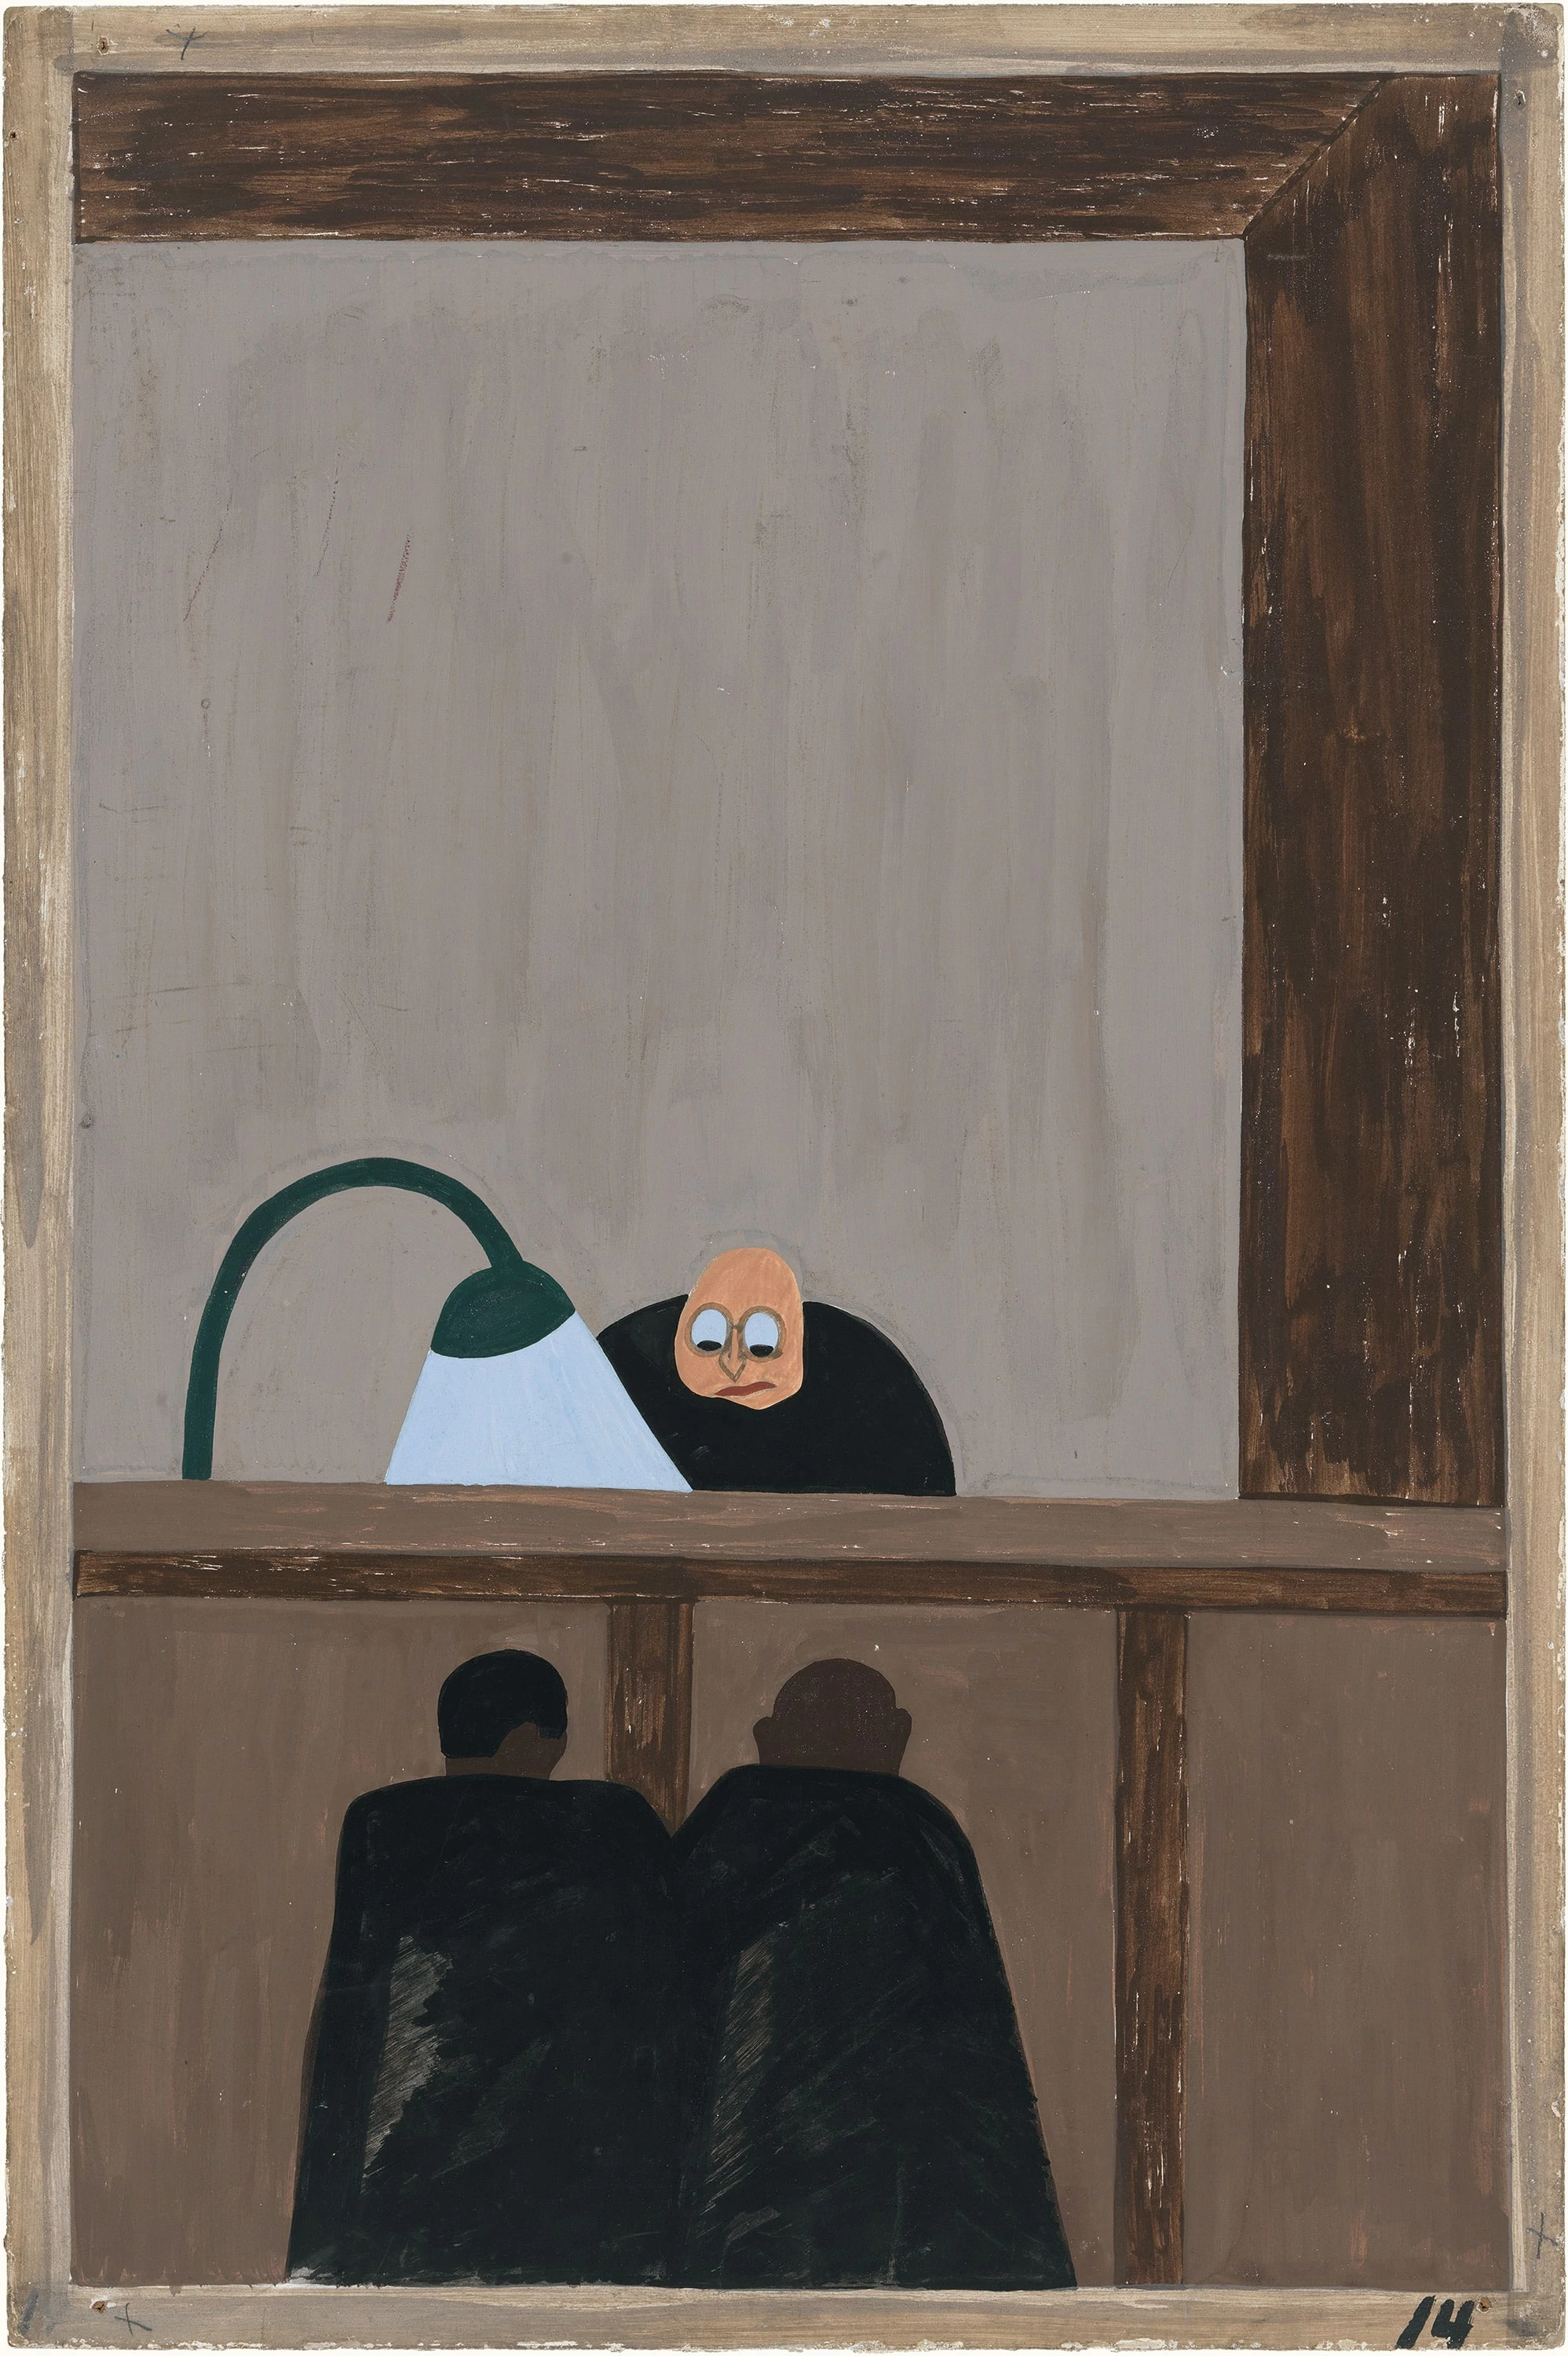 Migration Series No.14: For African Americans there was no justice in the southern courts, Jacob Lawrence